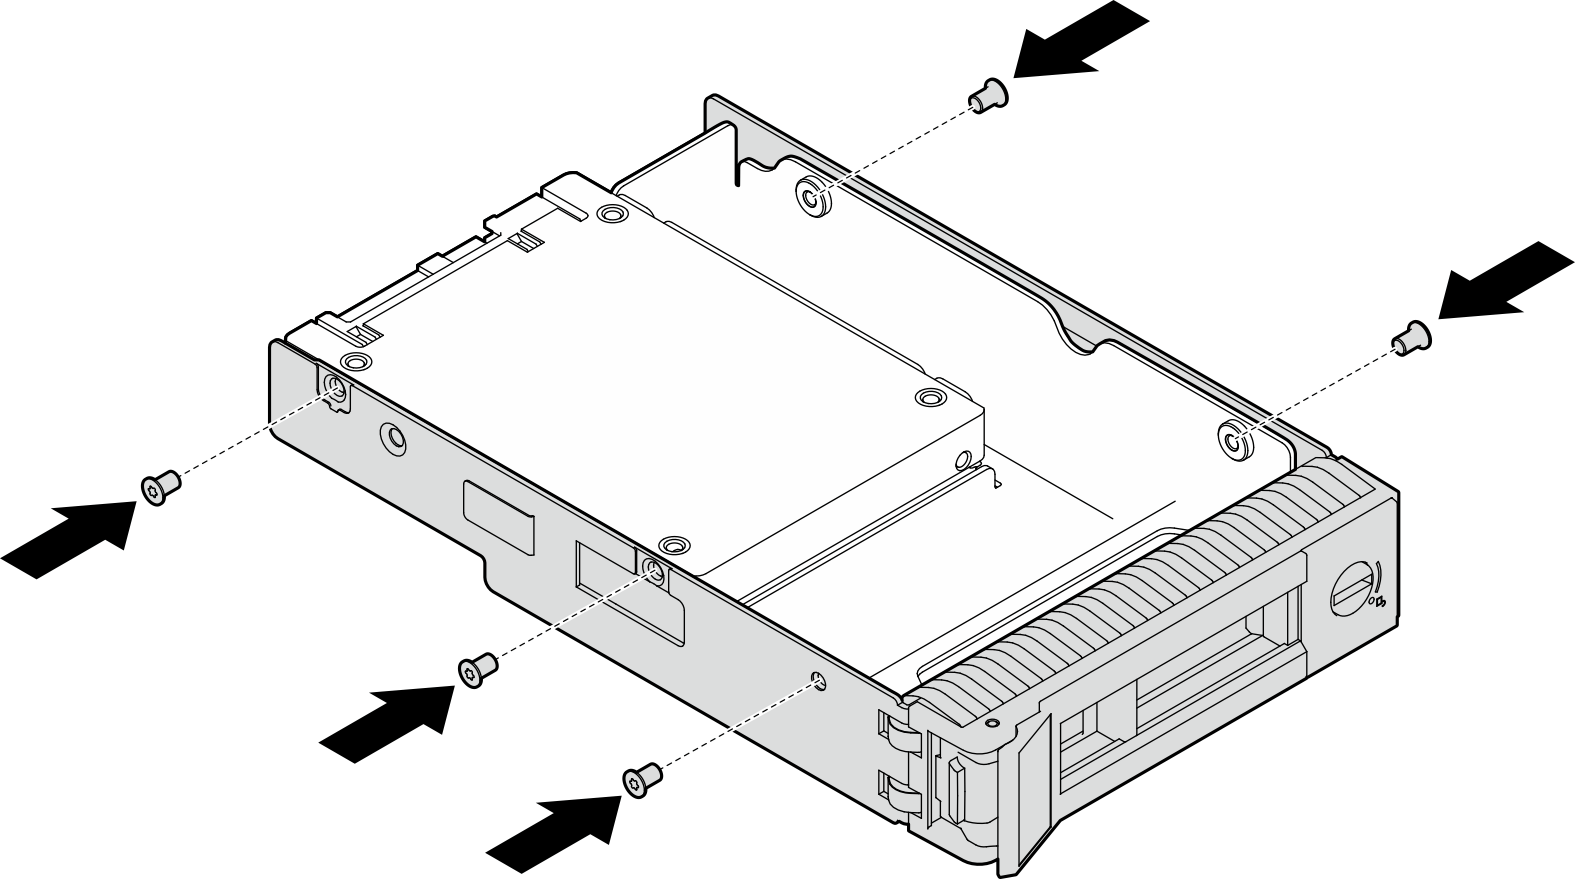 Installing the screws to secure the drive adapter and the drive to the drive tray